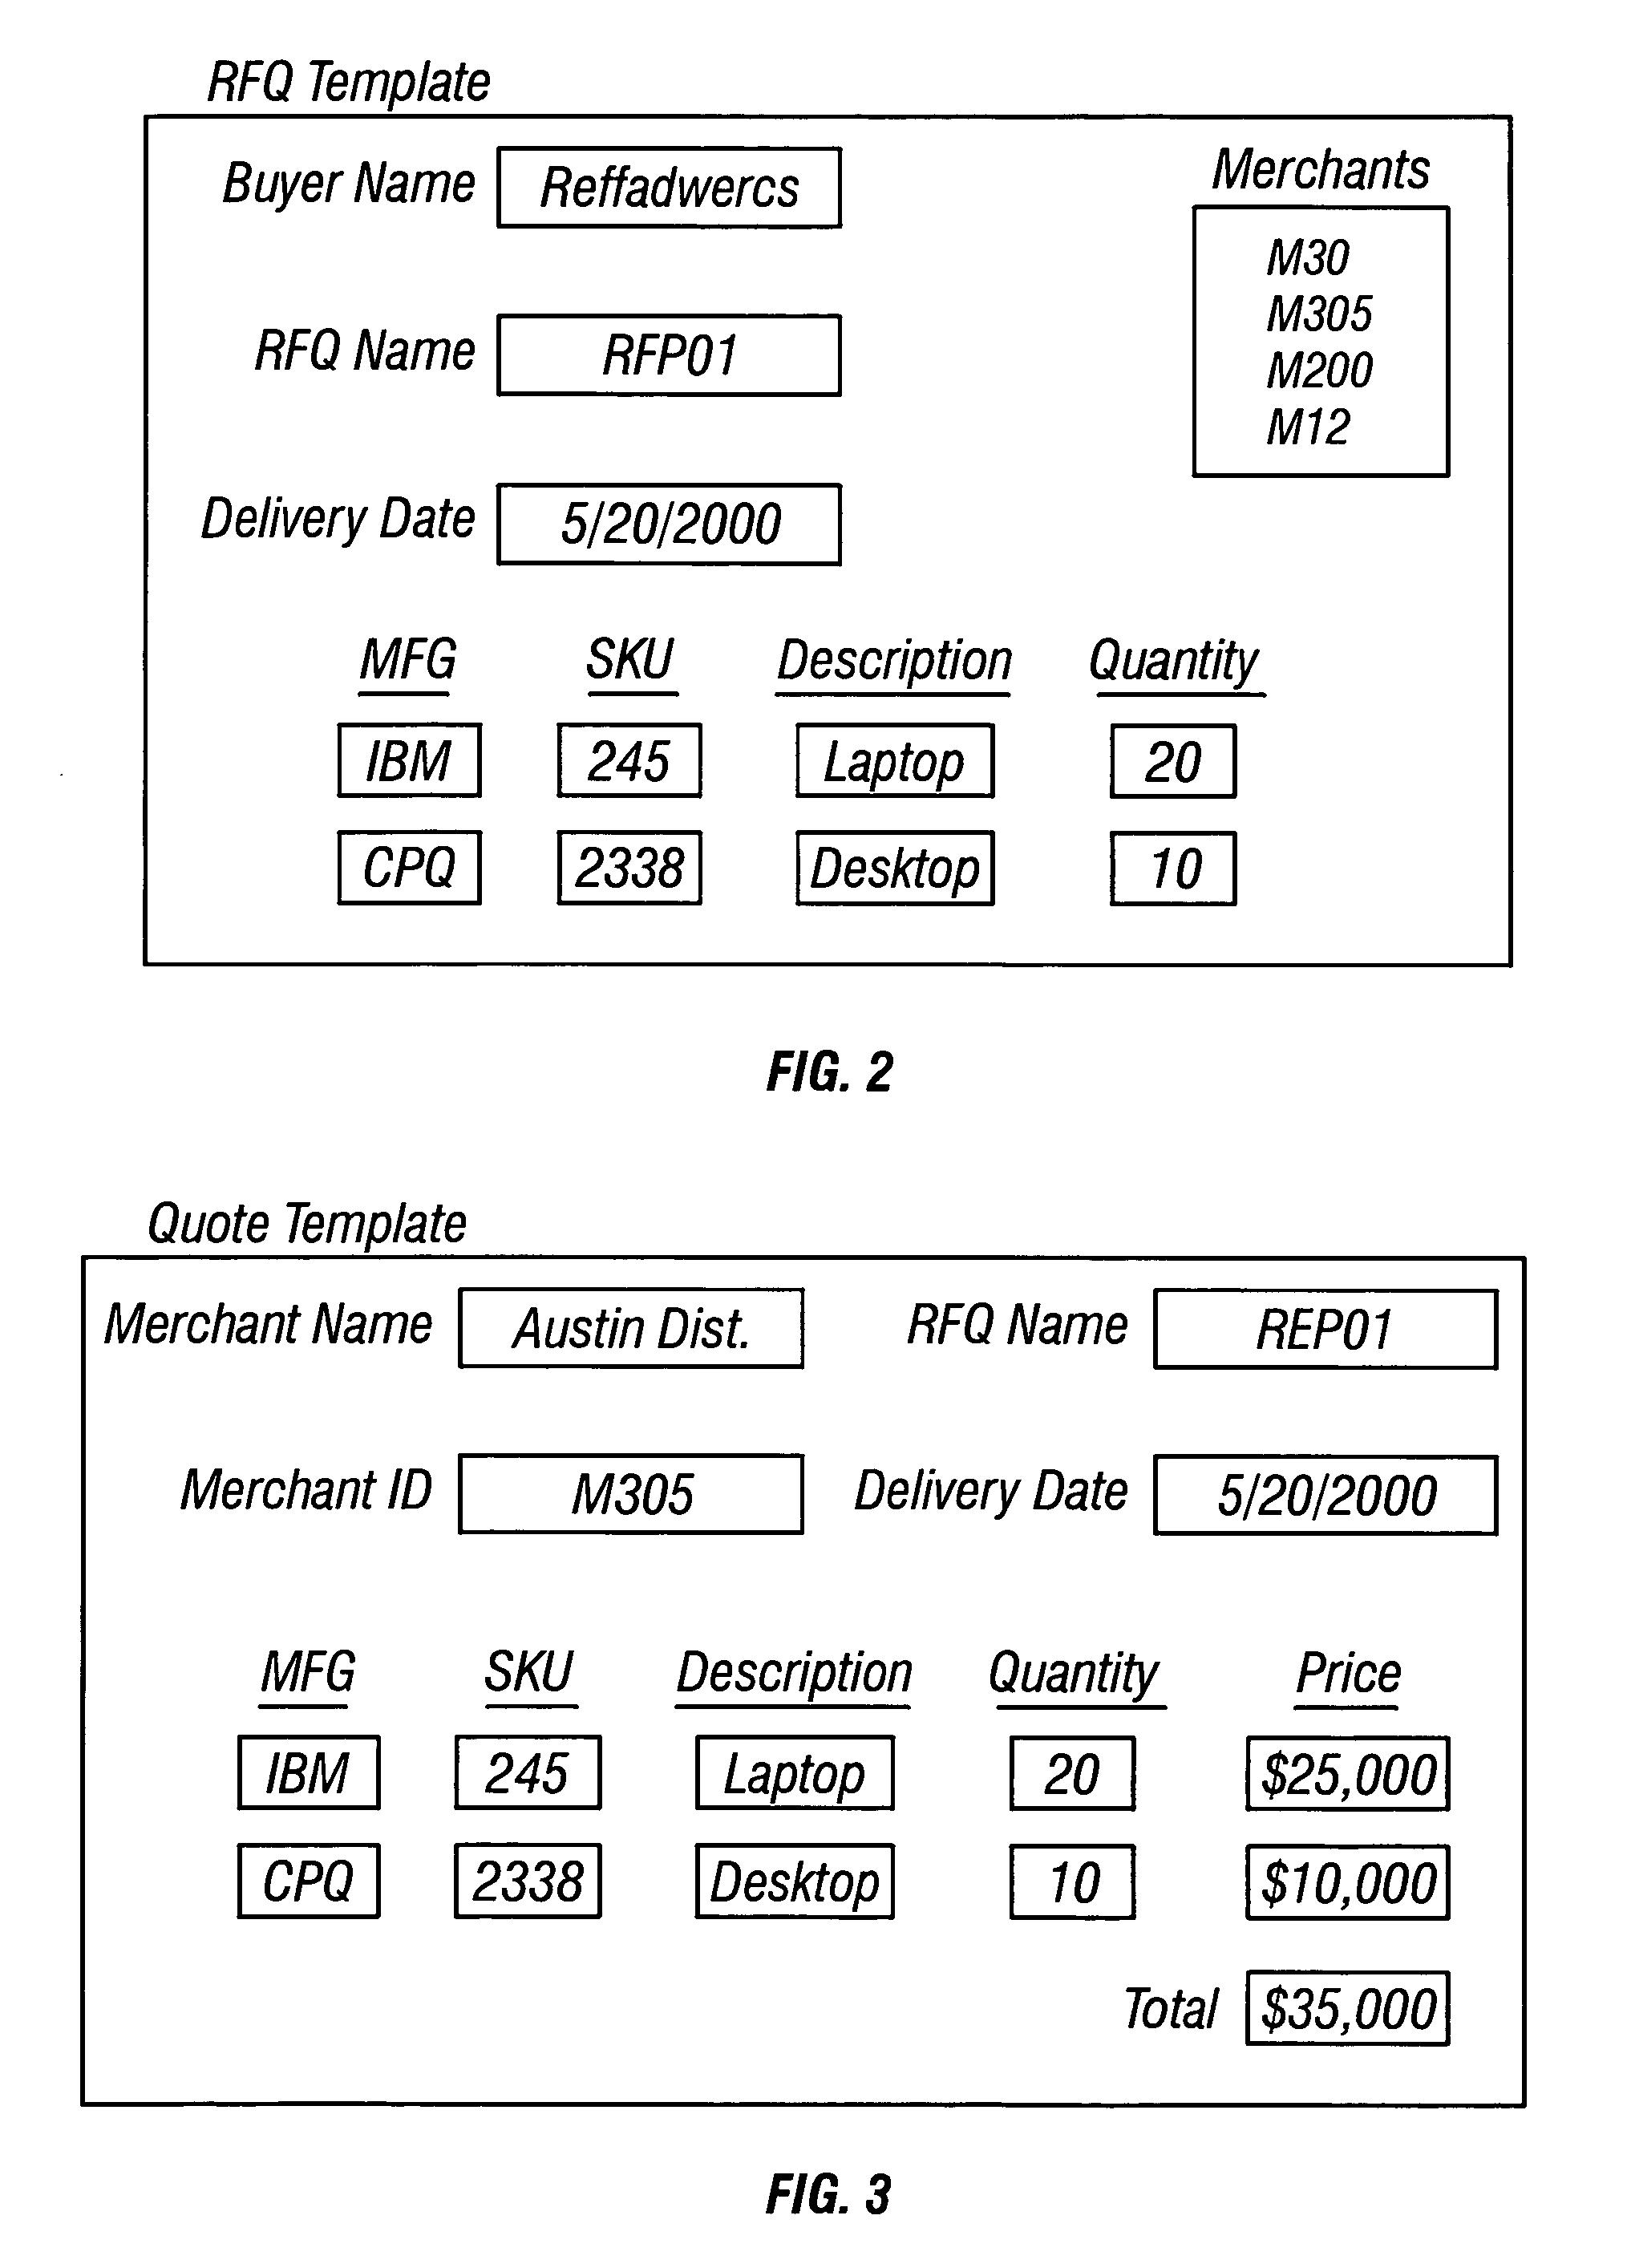 Method and apparatus for filtering and/or sorting responses to electronic requests for quote